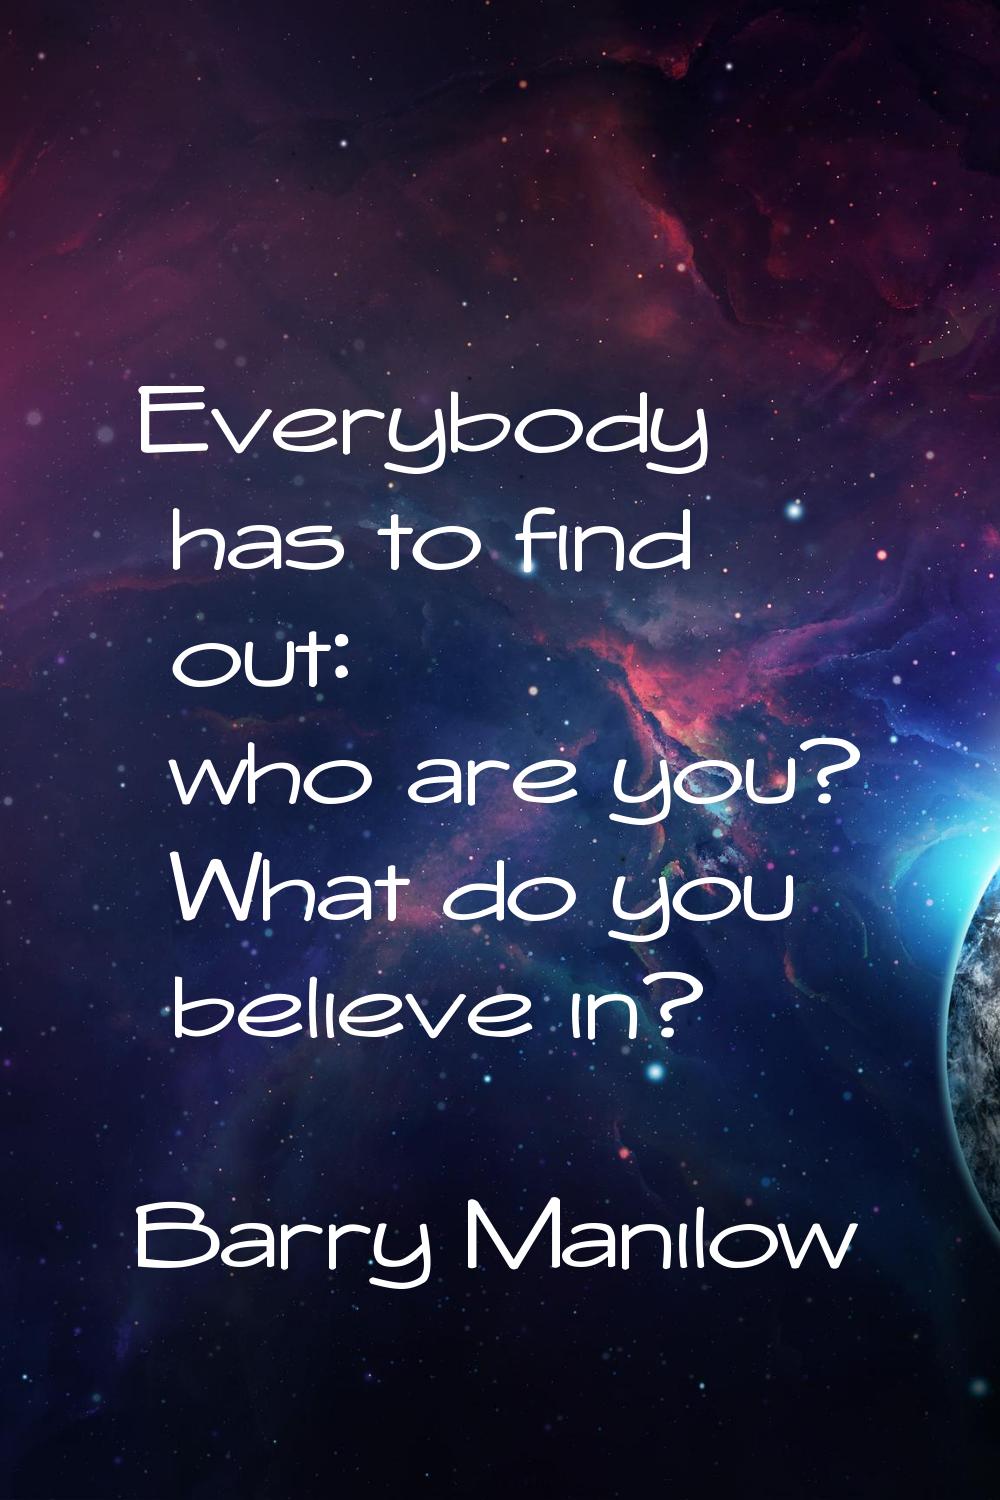 Everybody has to find out: who are you? What do you believe in?